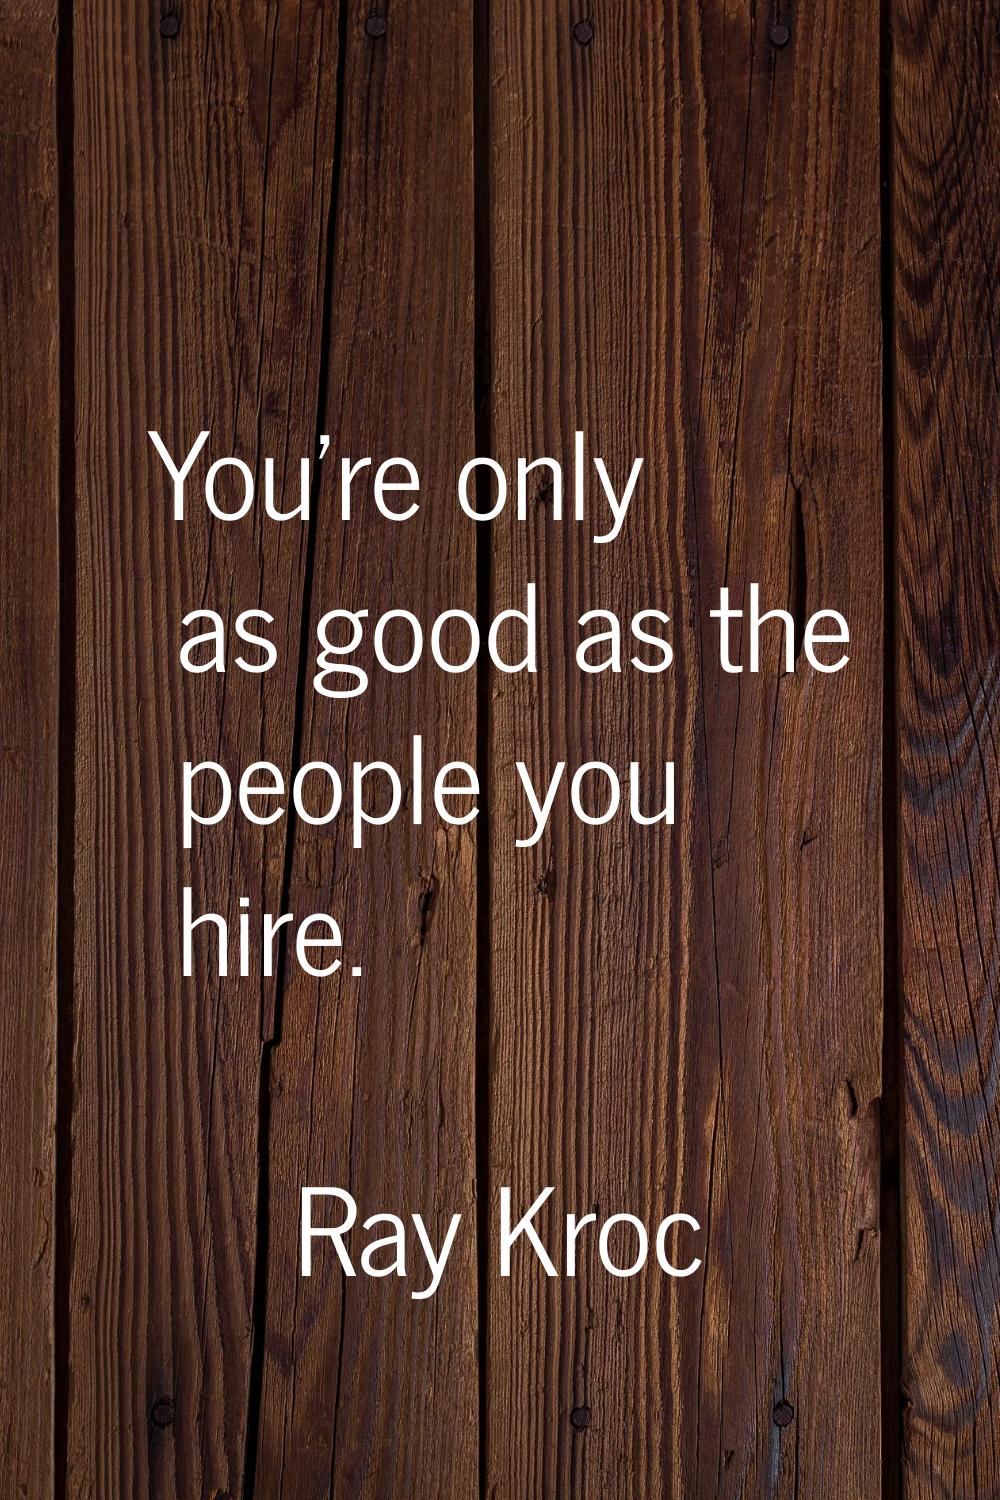 You're only as good as the people you hire.